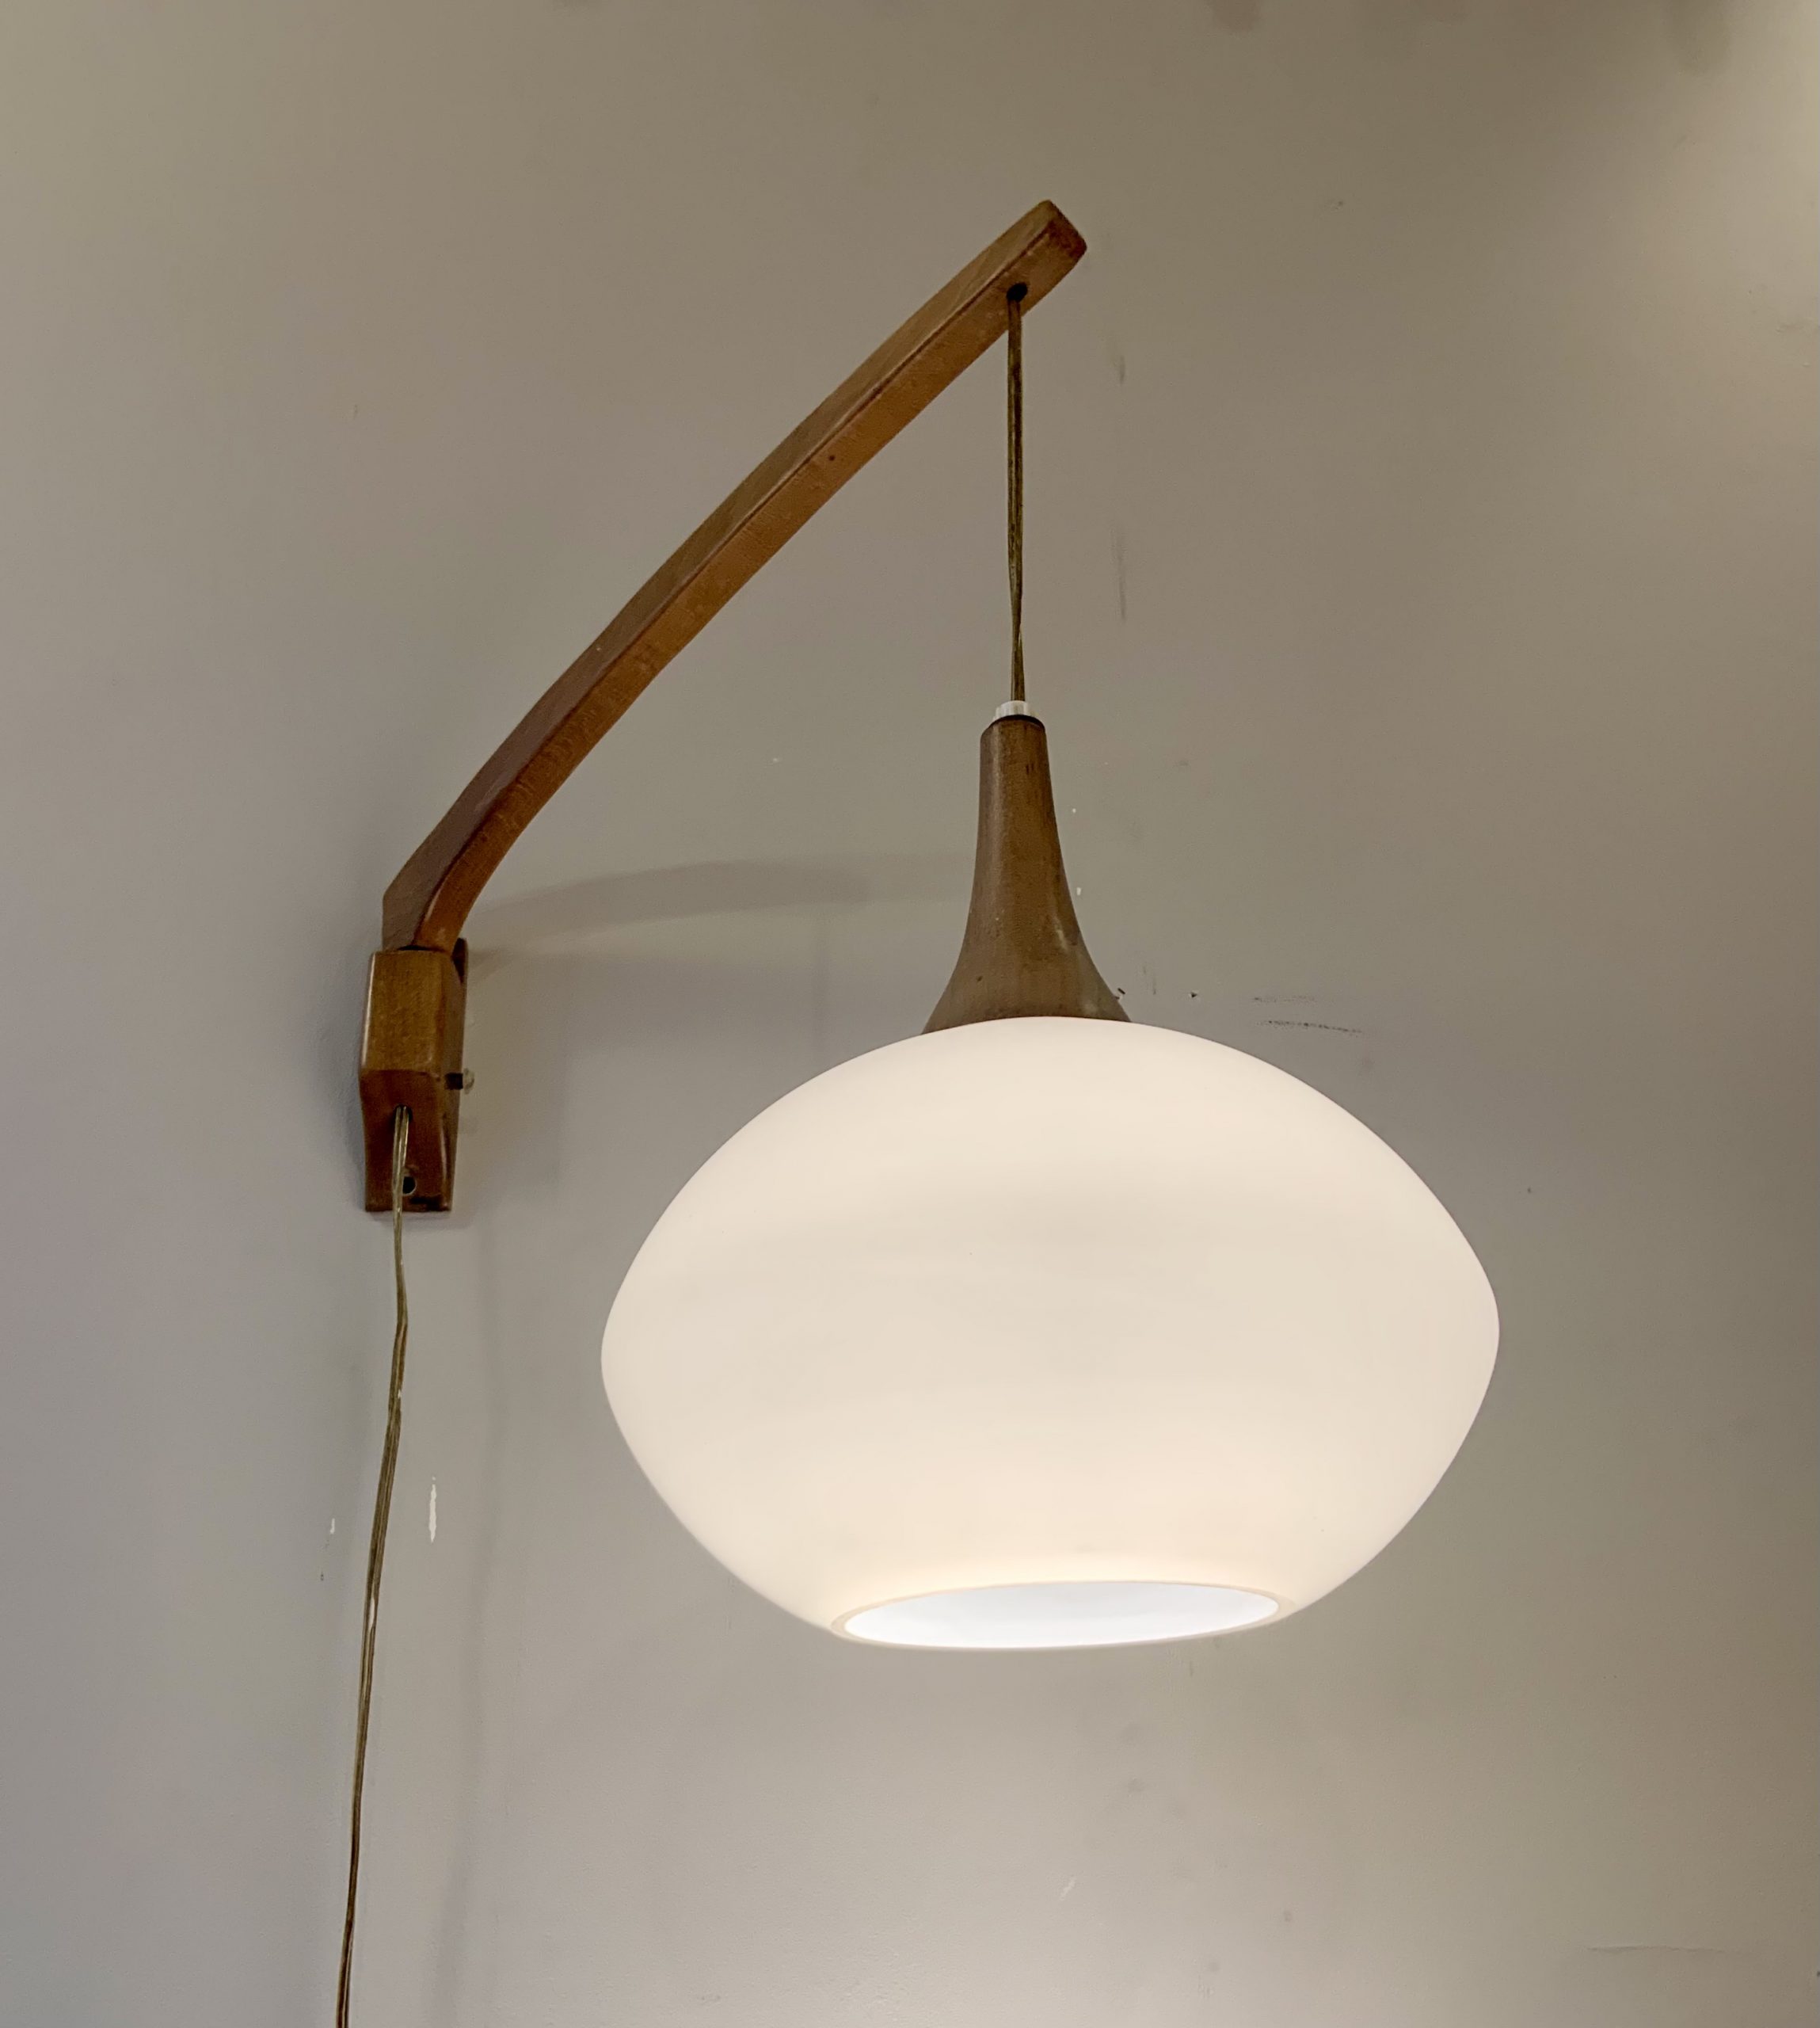 Wall Mounted Swing Arm Pendant Lamp from Denmark